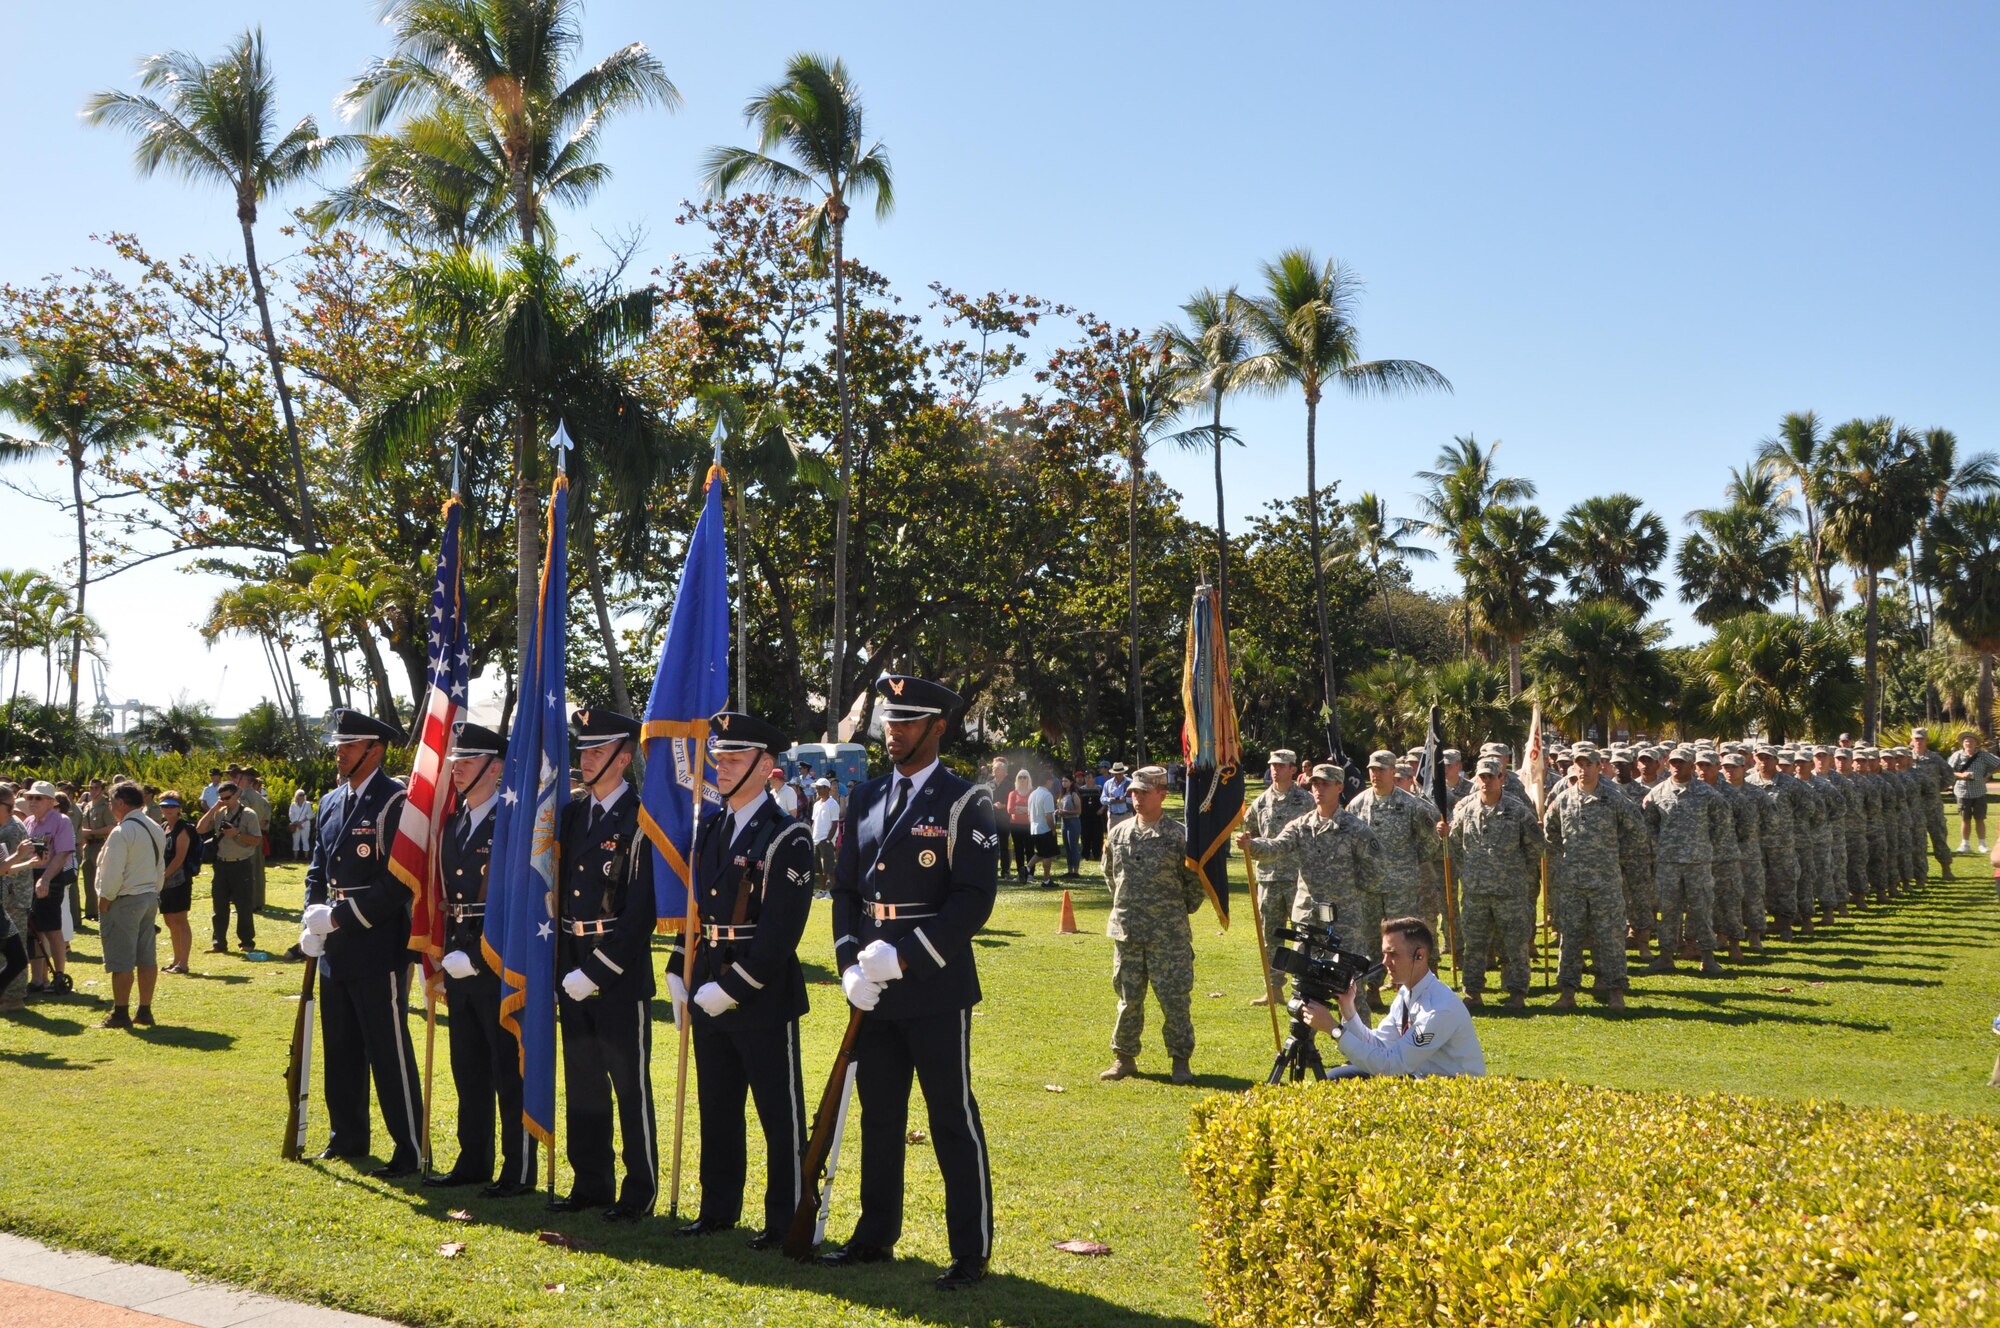 U.S. Airmen, part of the Yokota Air Base Honor Guard, and Soldiers, from the Hawaii-based 2nd Battalion, 27th Infantry Regiment, stand in formation during the Townsville, Australia VP70 Memorial Service, Aug. 15, 2015.  The service took place at ANZAC Park and honored all those who gave their lives in the defense of their country and led to victory in the Pacific 70 years ago. (U.S. Air Force photo by Capt. George M. Tobias/Released)